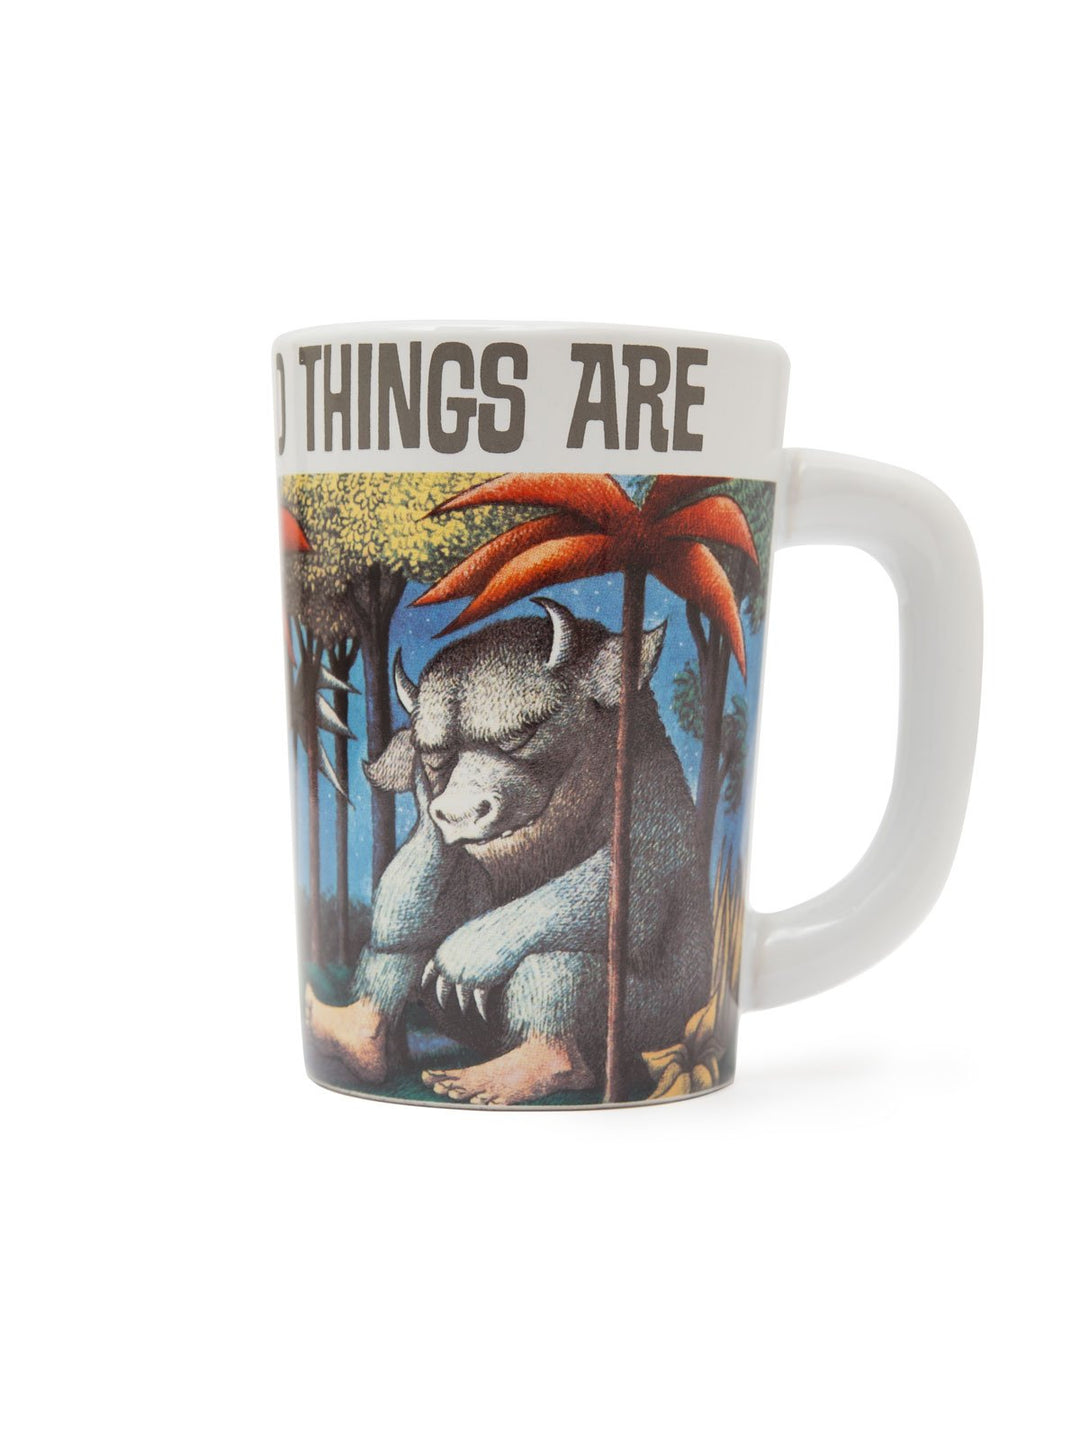 Where The Wild Things Are Mug - West of Camden - Main Image Number 2 of 2